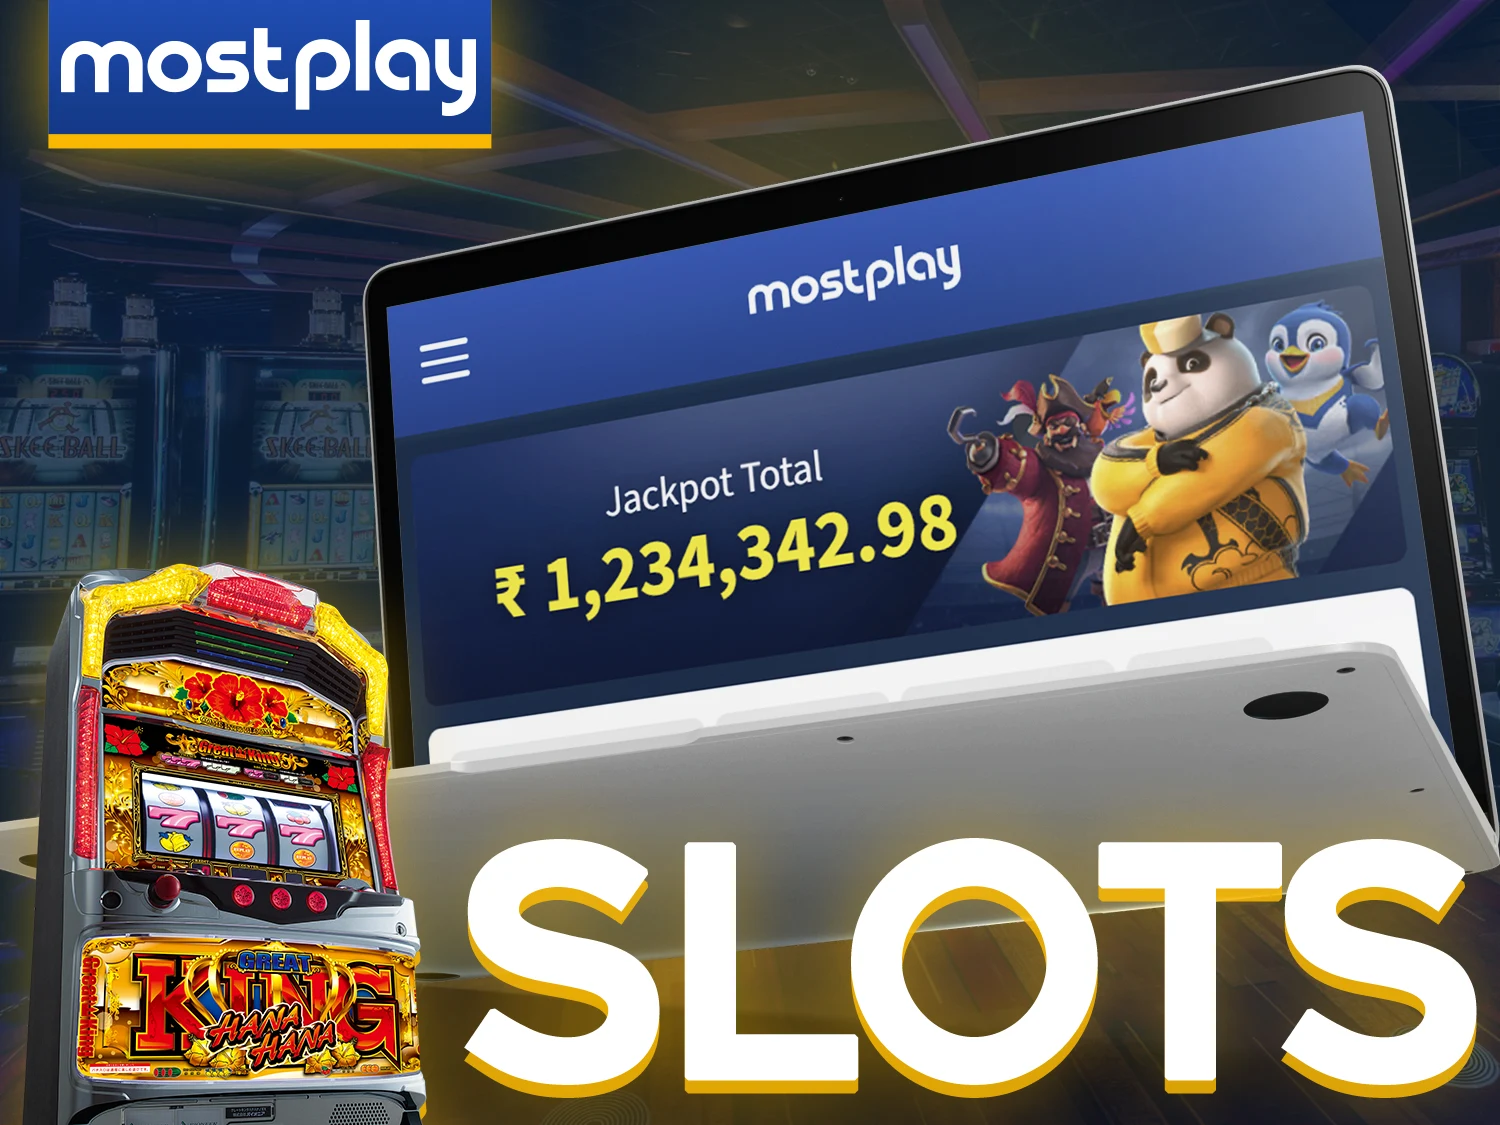 Search for your favorite slots on the Mostplay slots page.